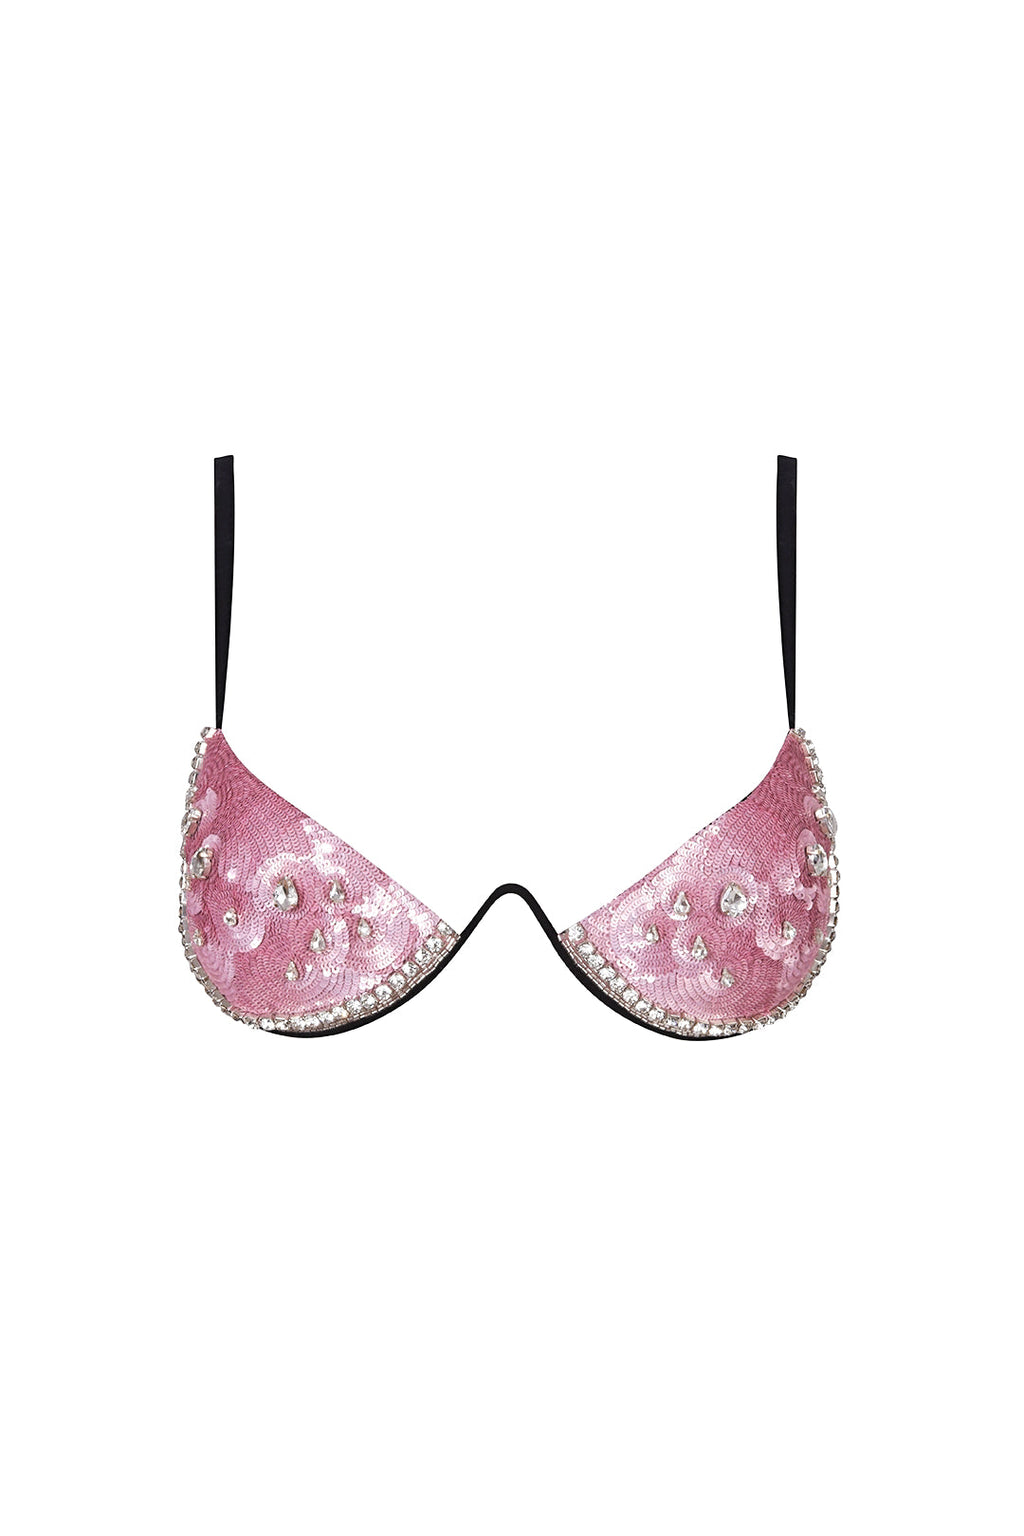 Embroidered Crystal Paillette Watermelon Bra